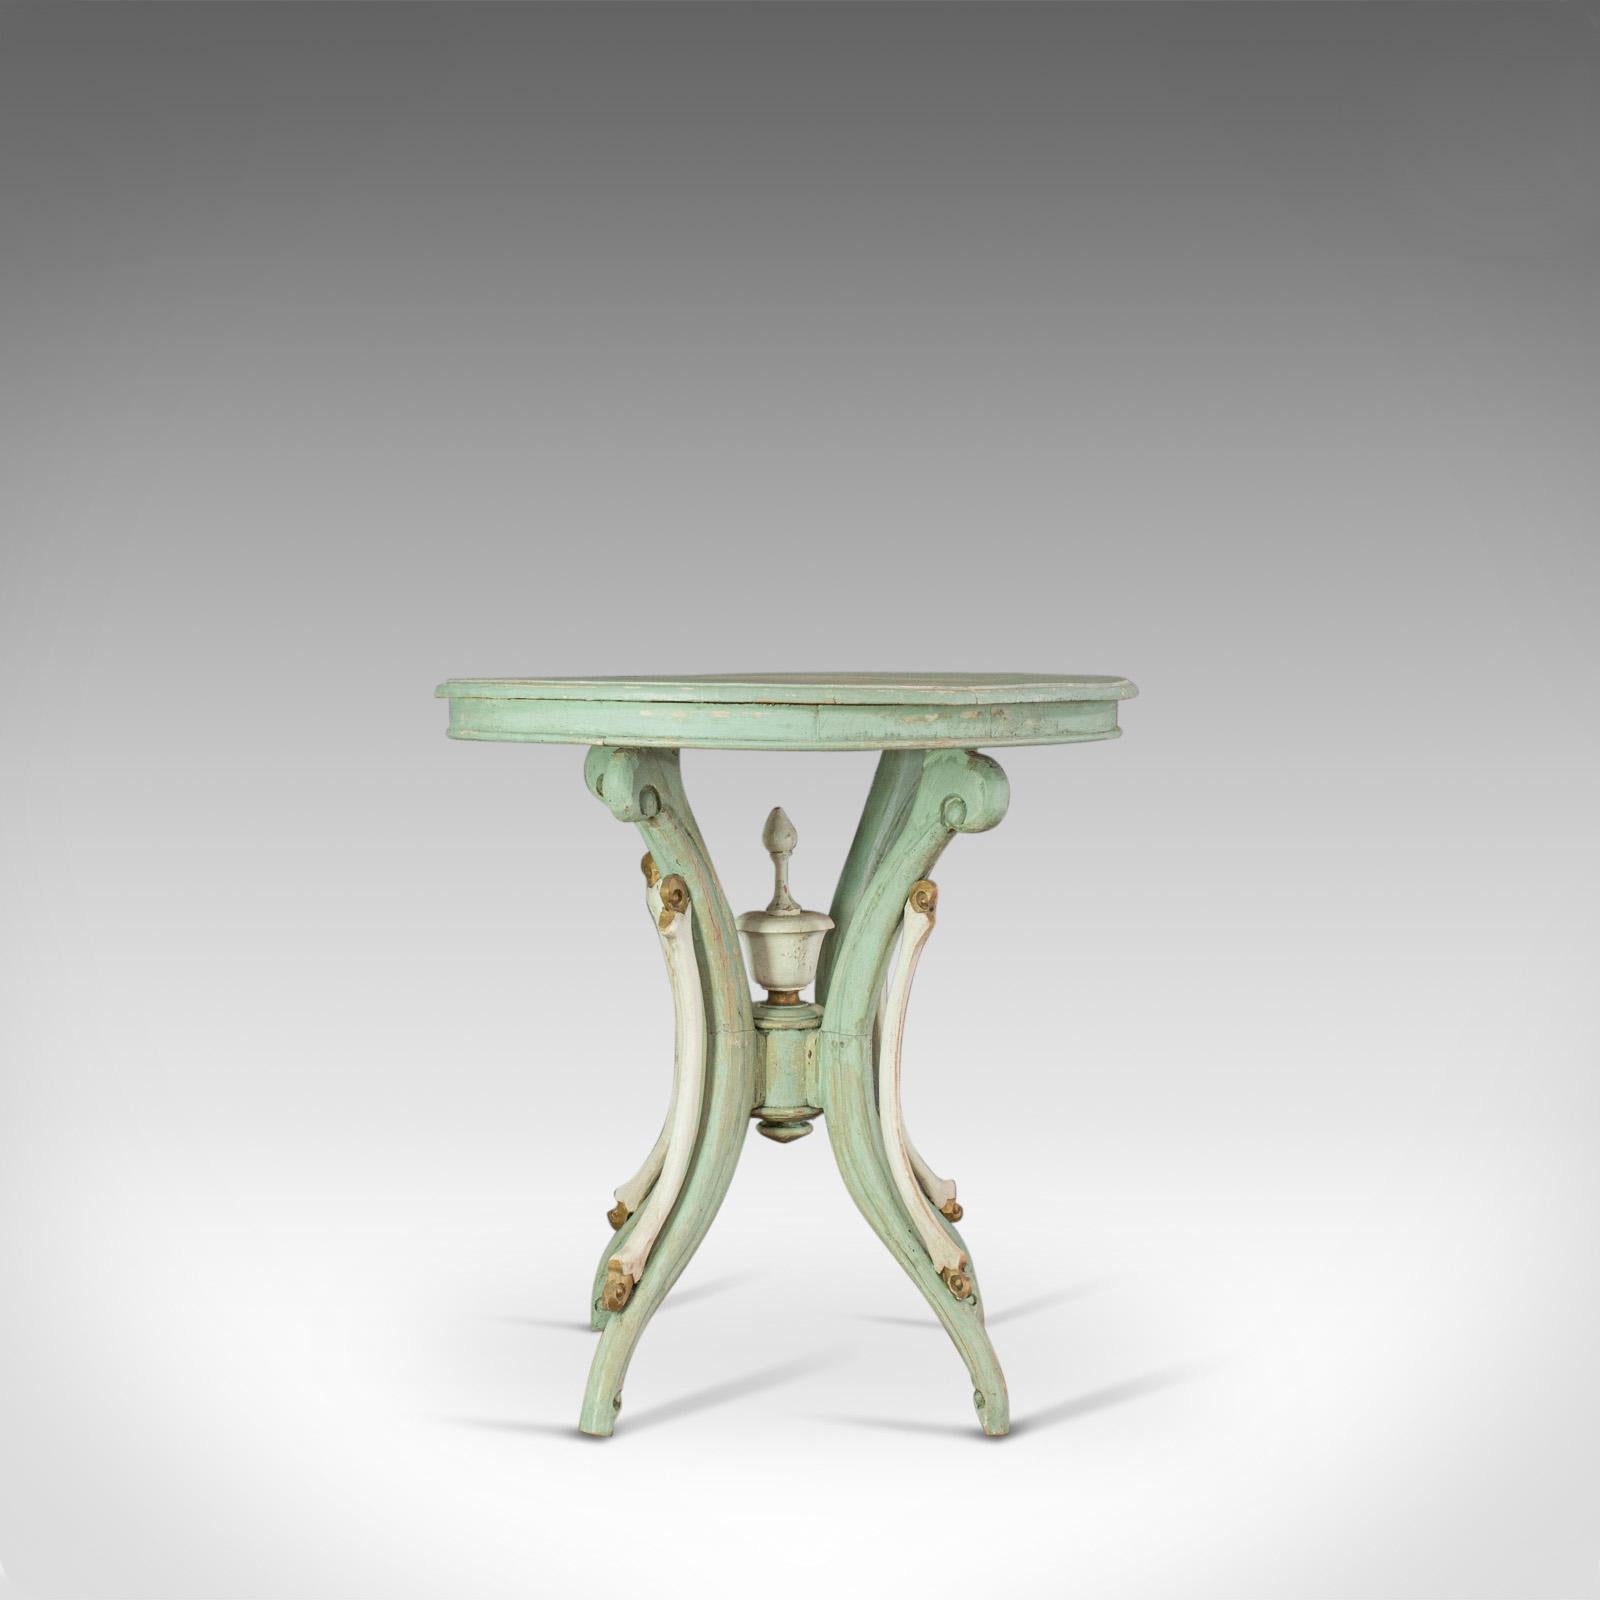 This is an antique side table. A French, painted pine cafe, lamp or occasional table dating to the late 19th century, circa 1890.

Desirable distressed finish, painted in pastels of mint and country white
Lifted with subtle highlights in gold and